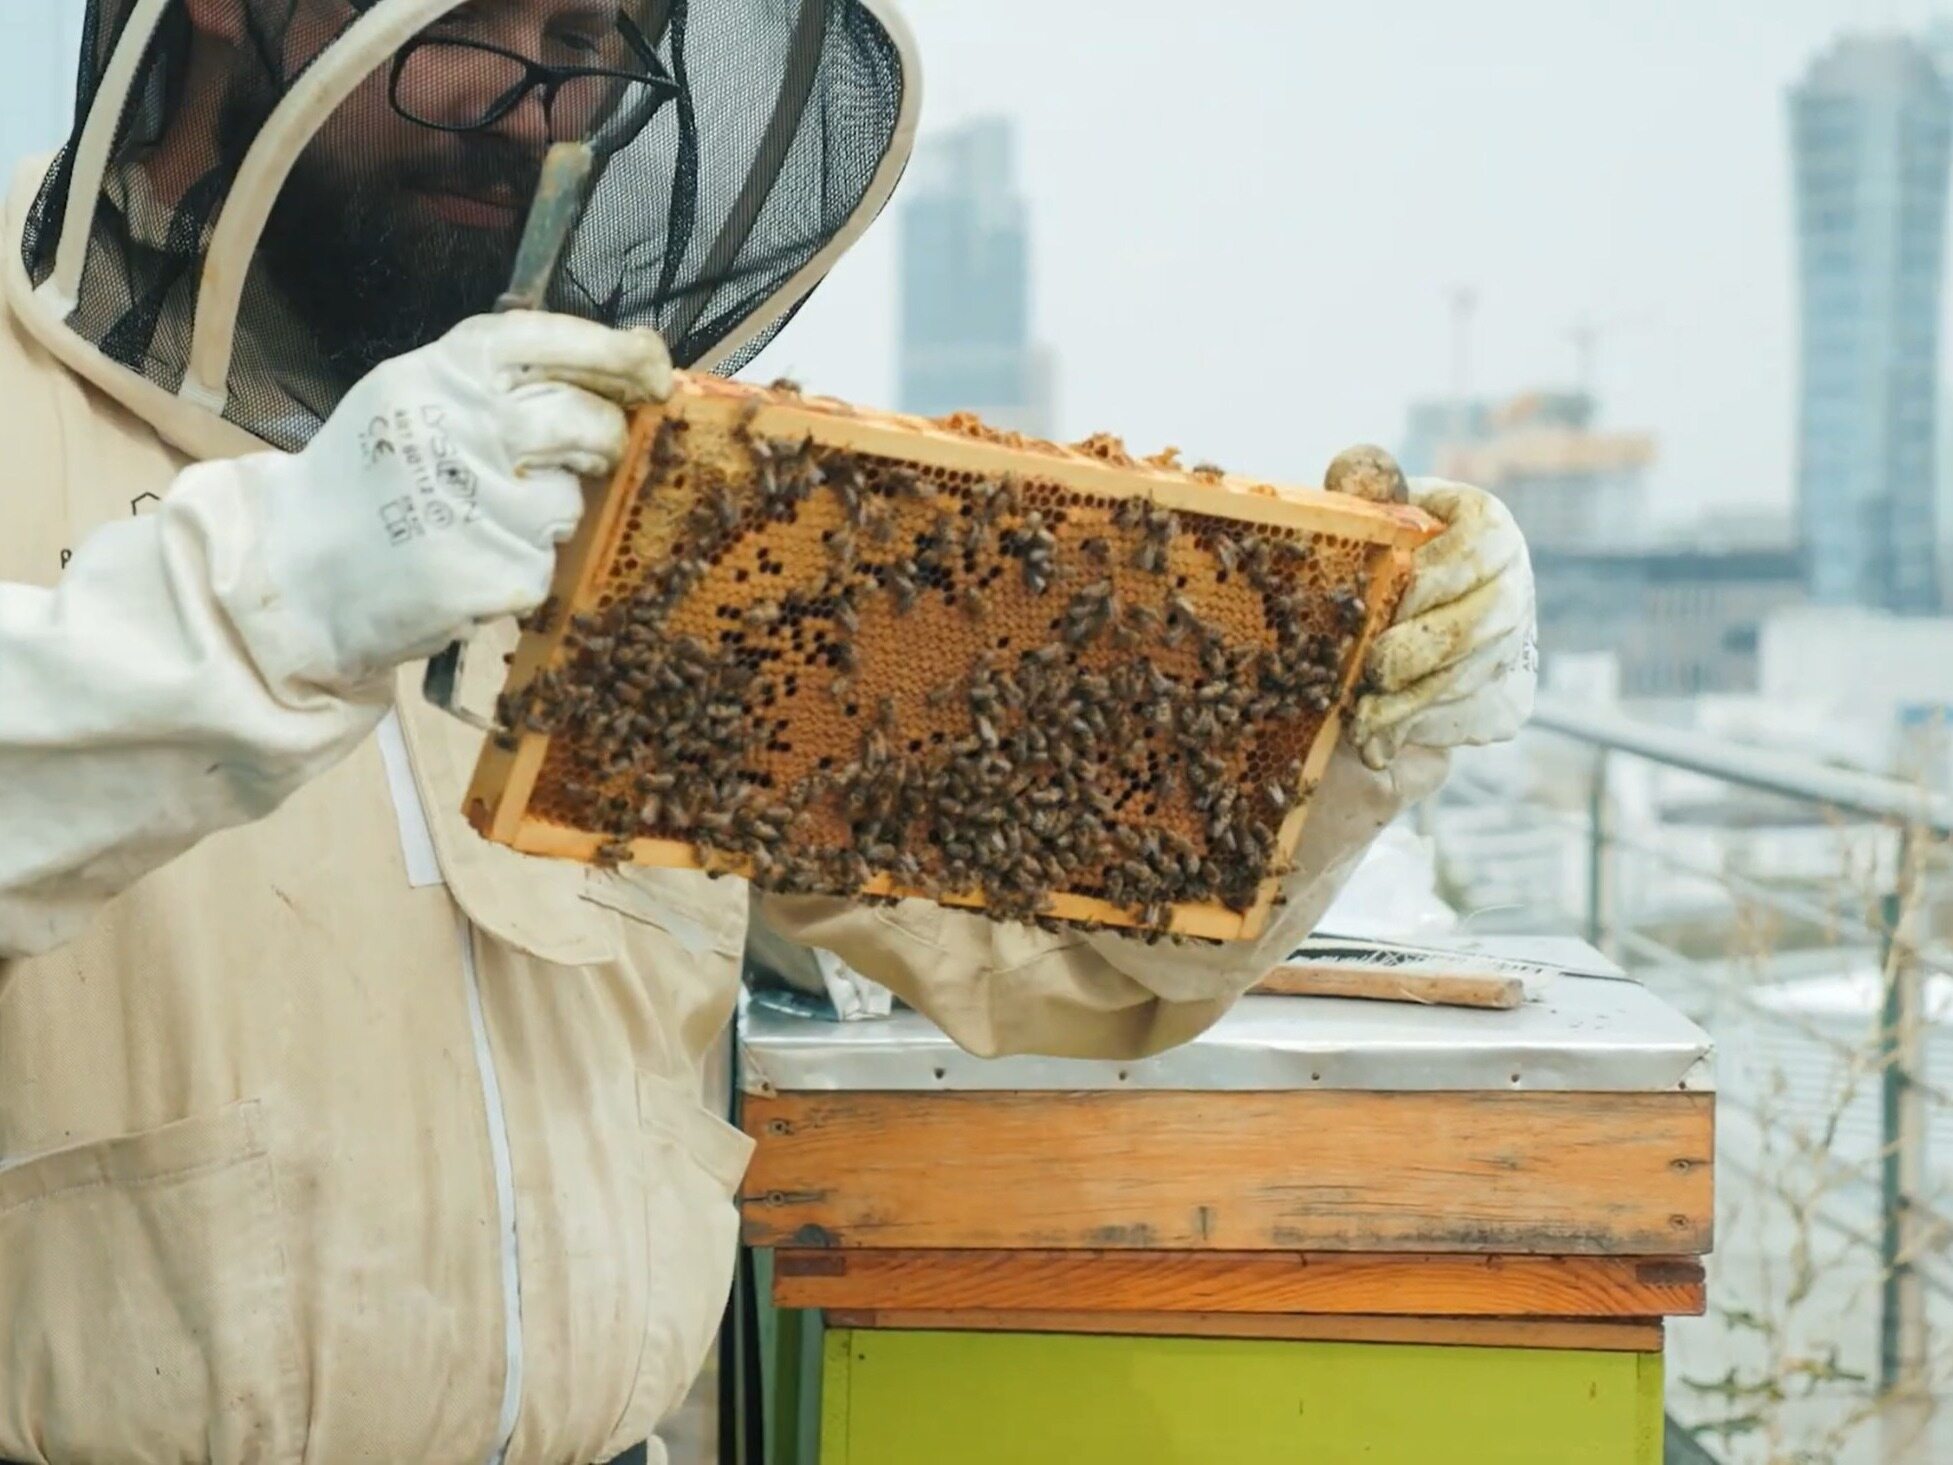 This is how beekeepers obtain honey from urban hives.  "The city is a special place for bees"